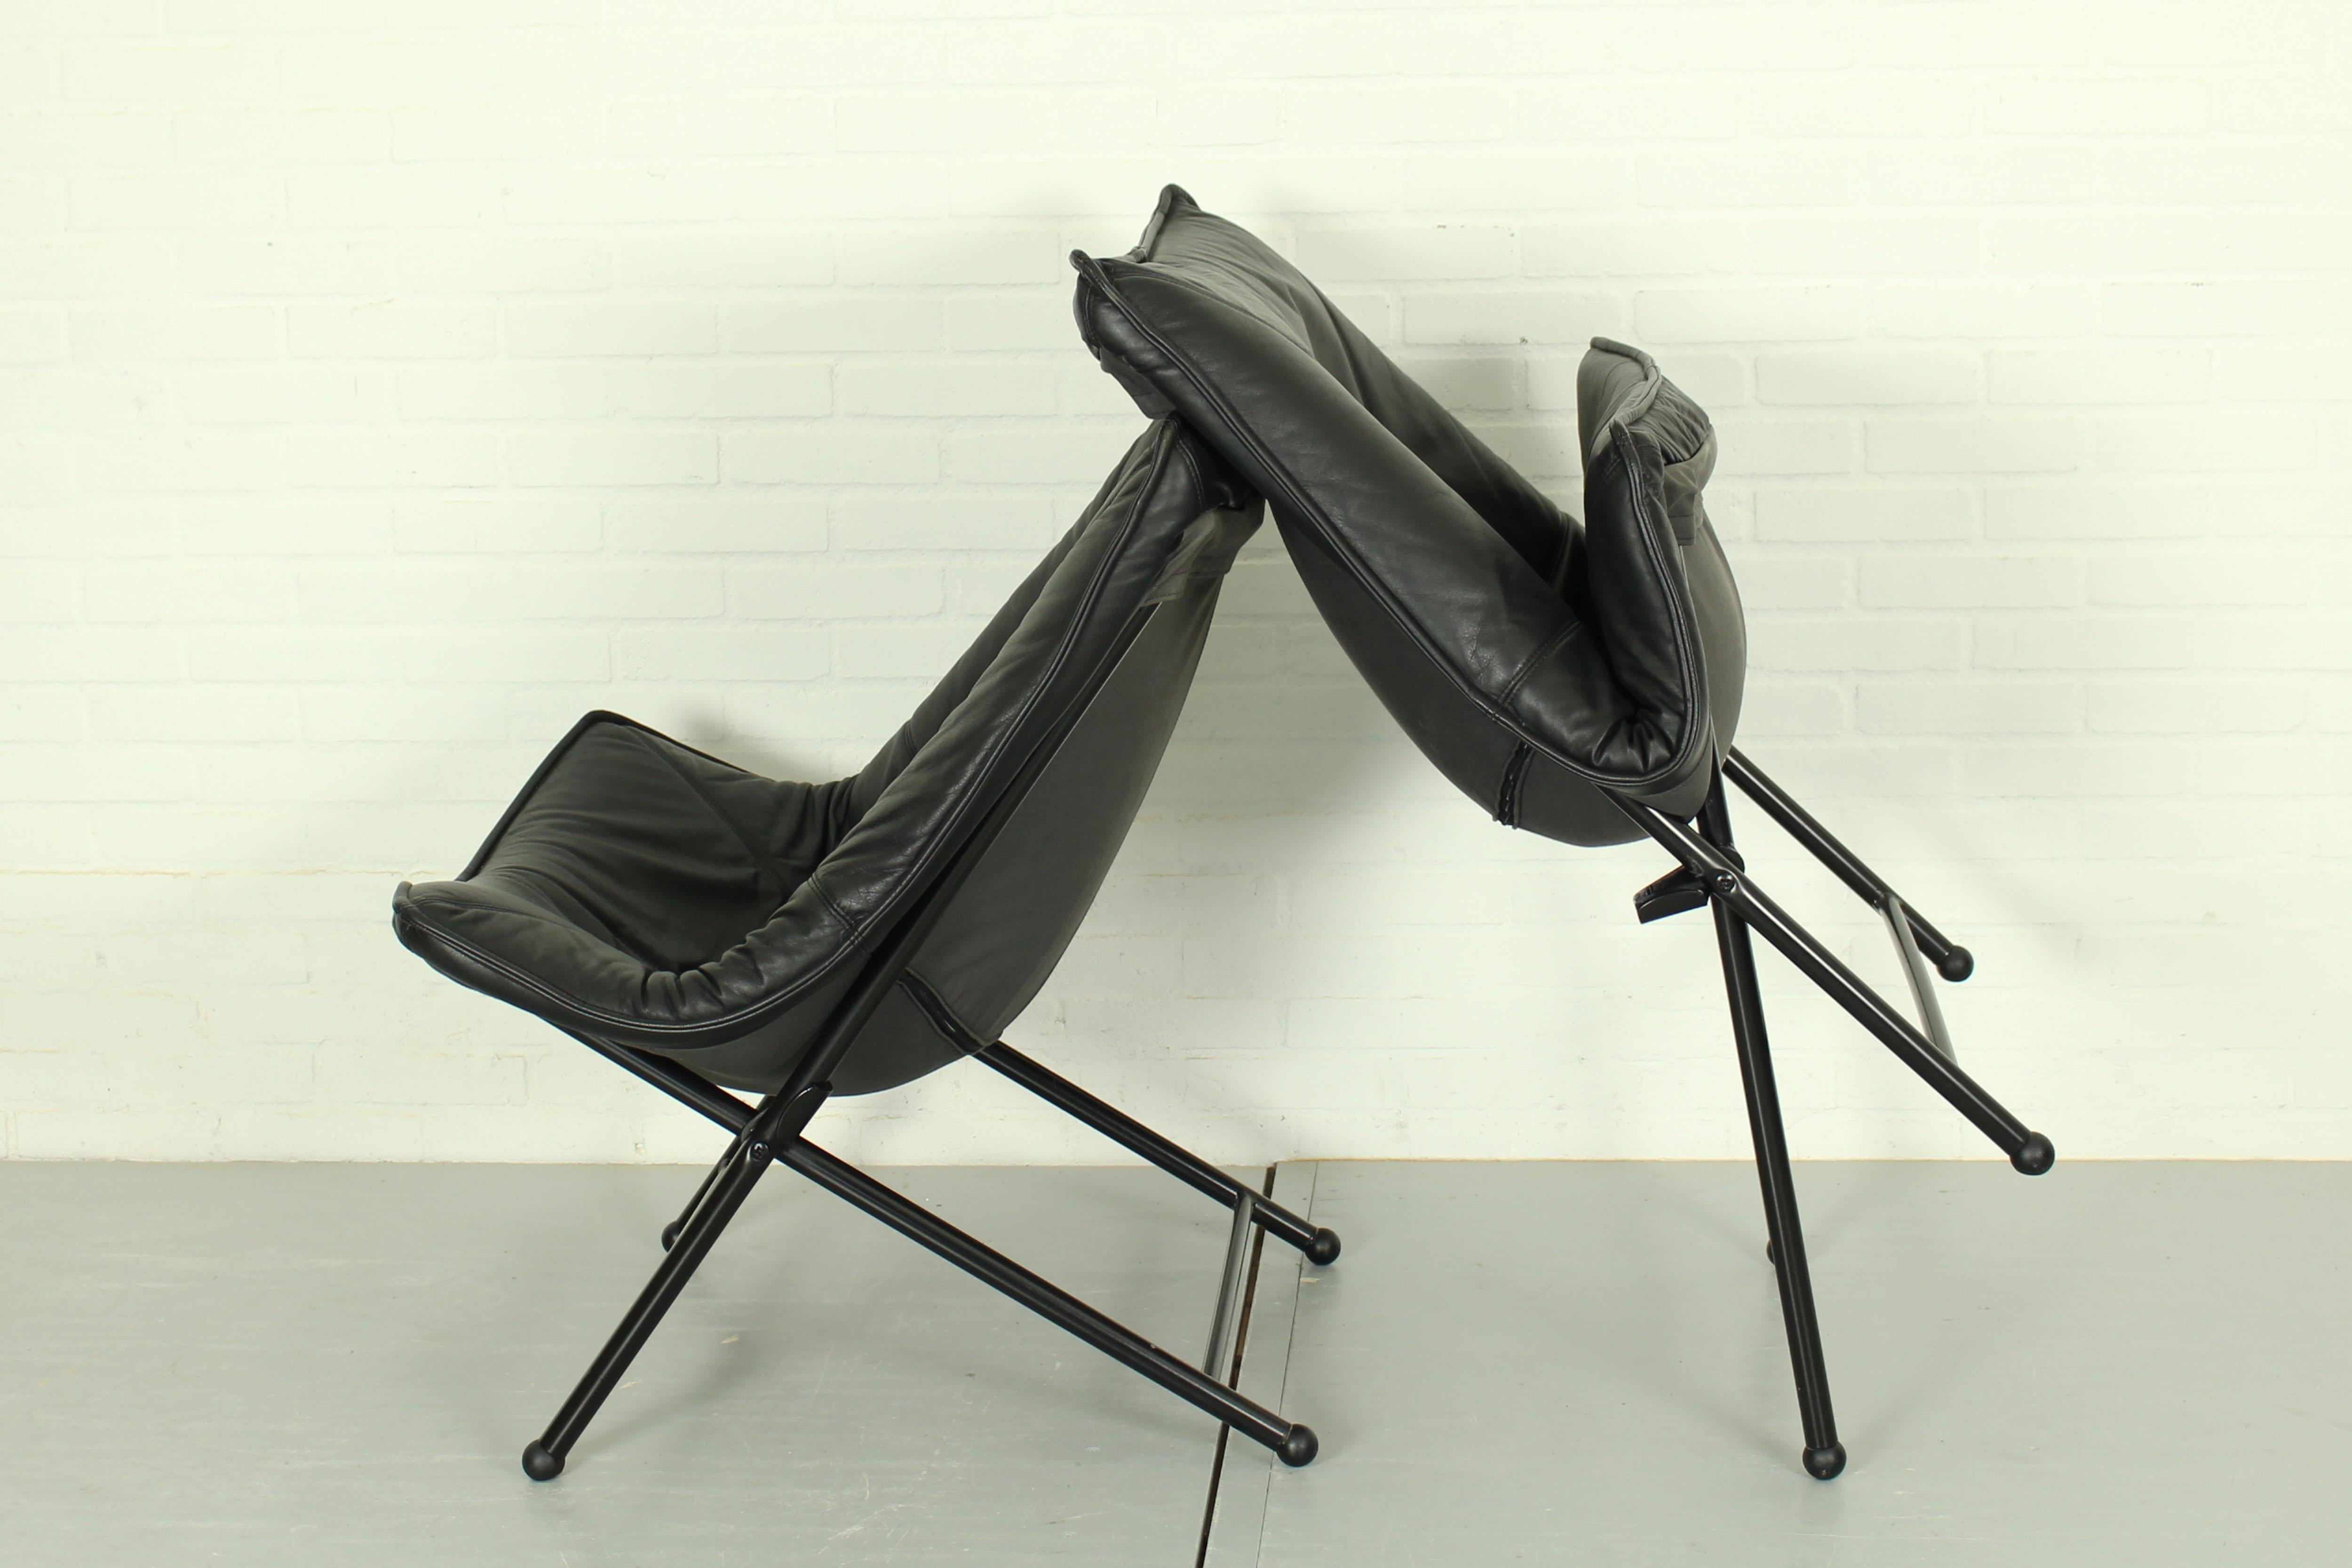 Folding Lounge Chairs in Black Leather by Teun Van Zanten for Molinari, 1970s For Sale 3